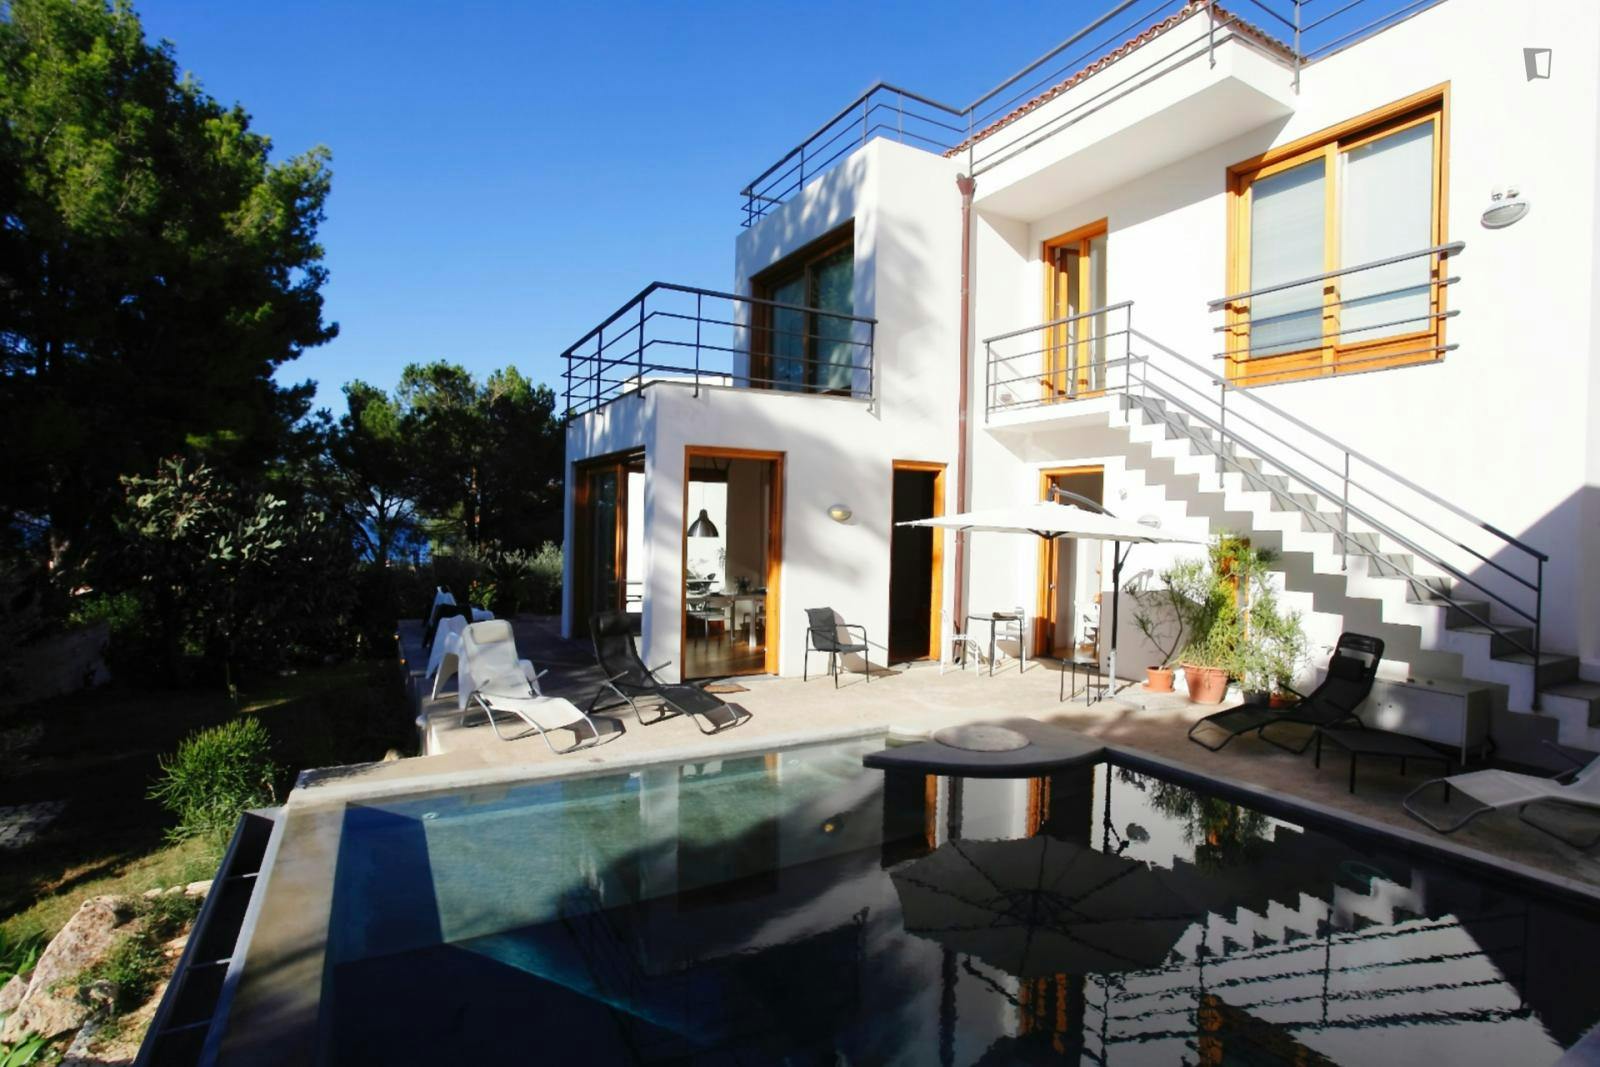 Stunning 4-Bedroom Villa by the sea in Altavilla Milicia with shared pool